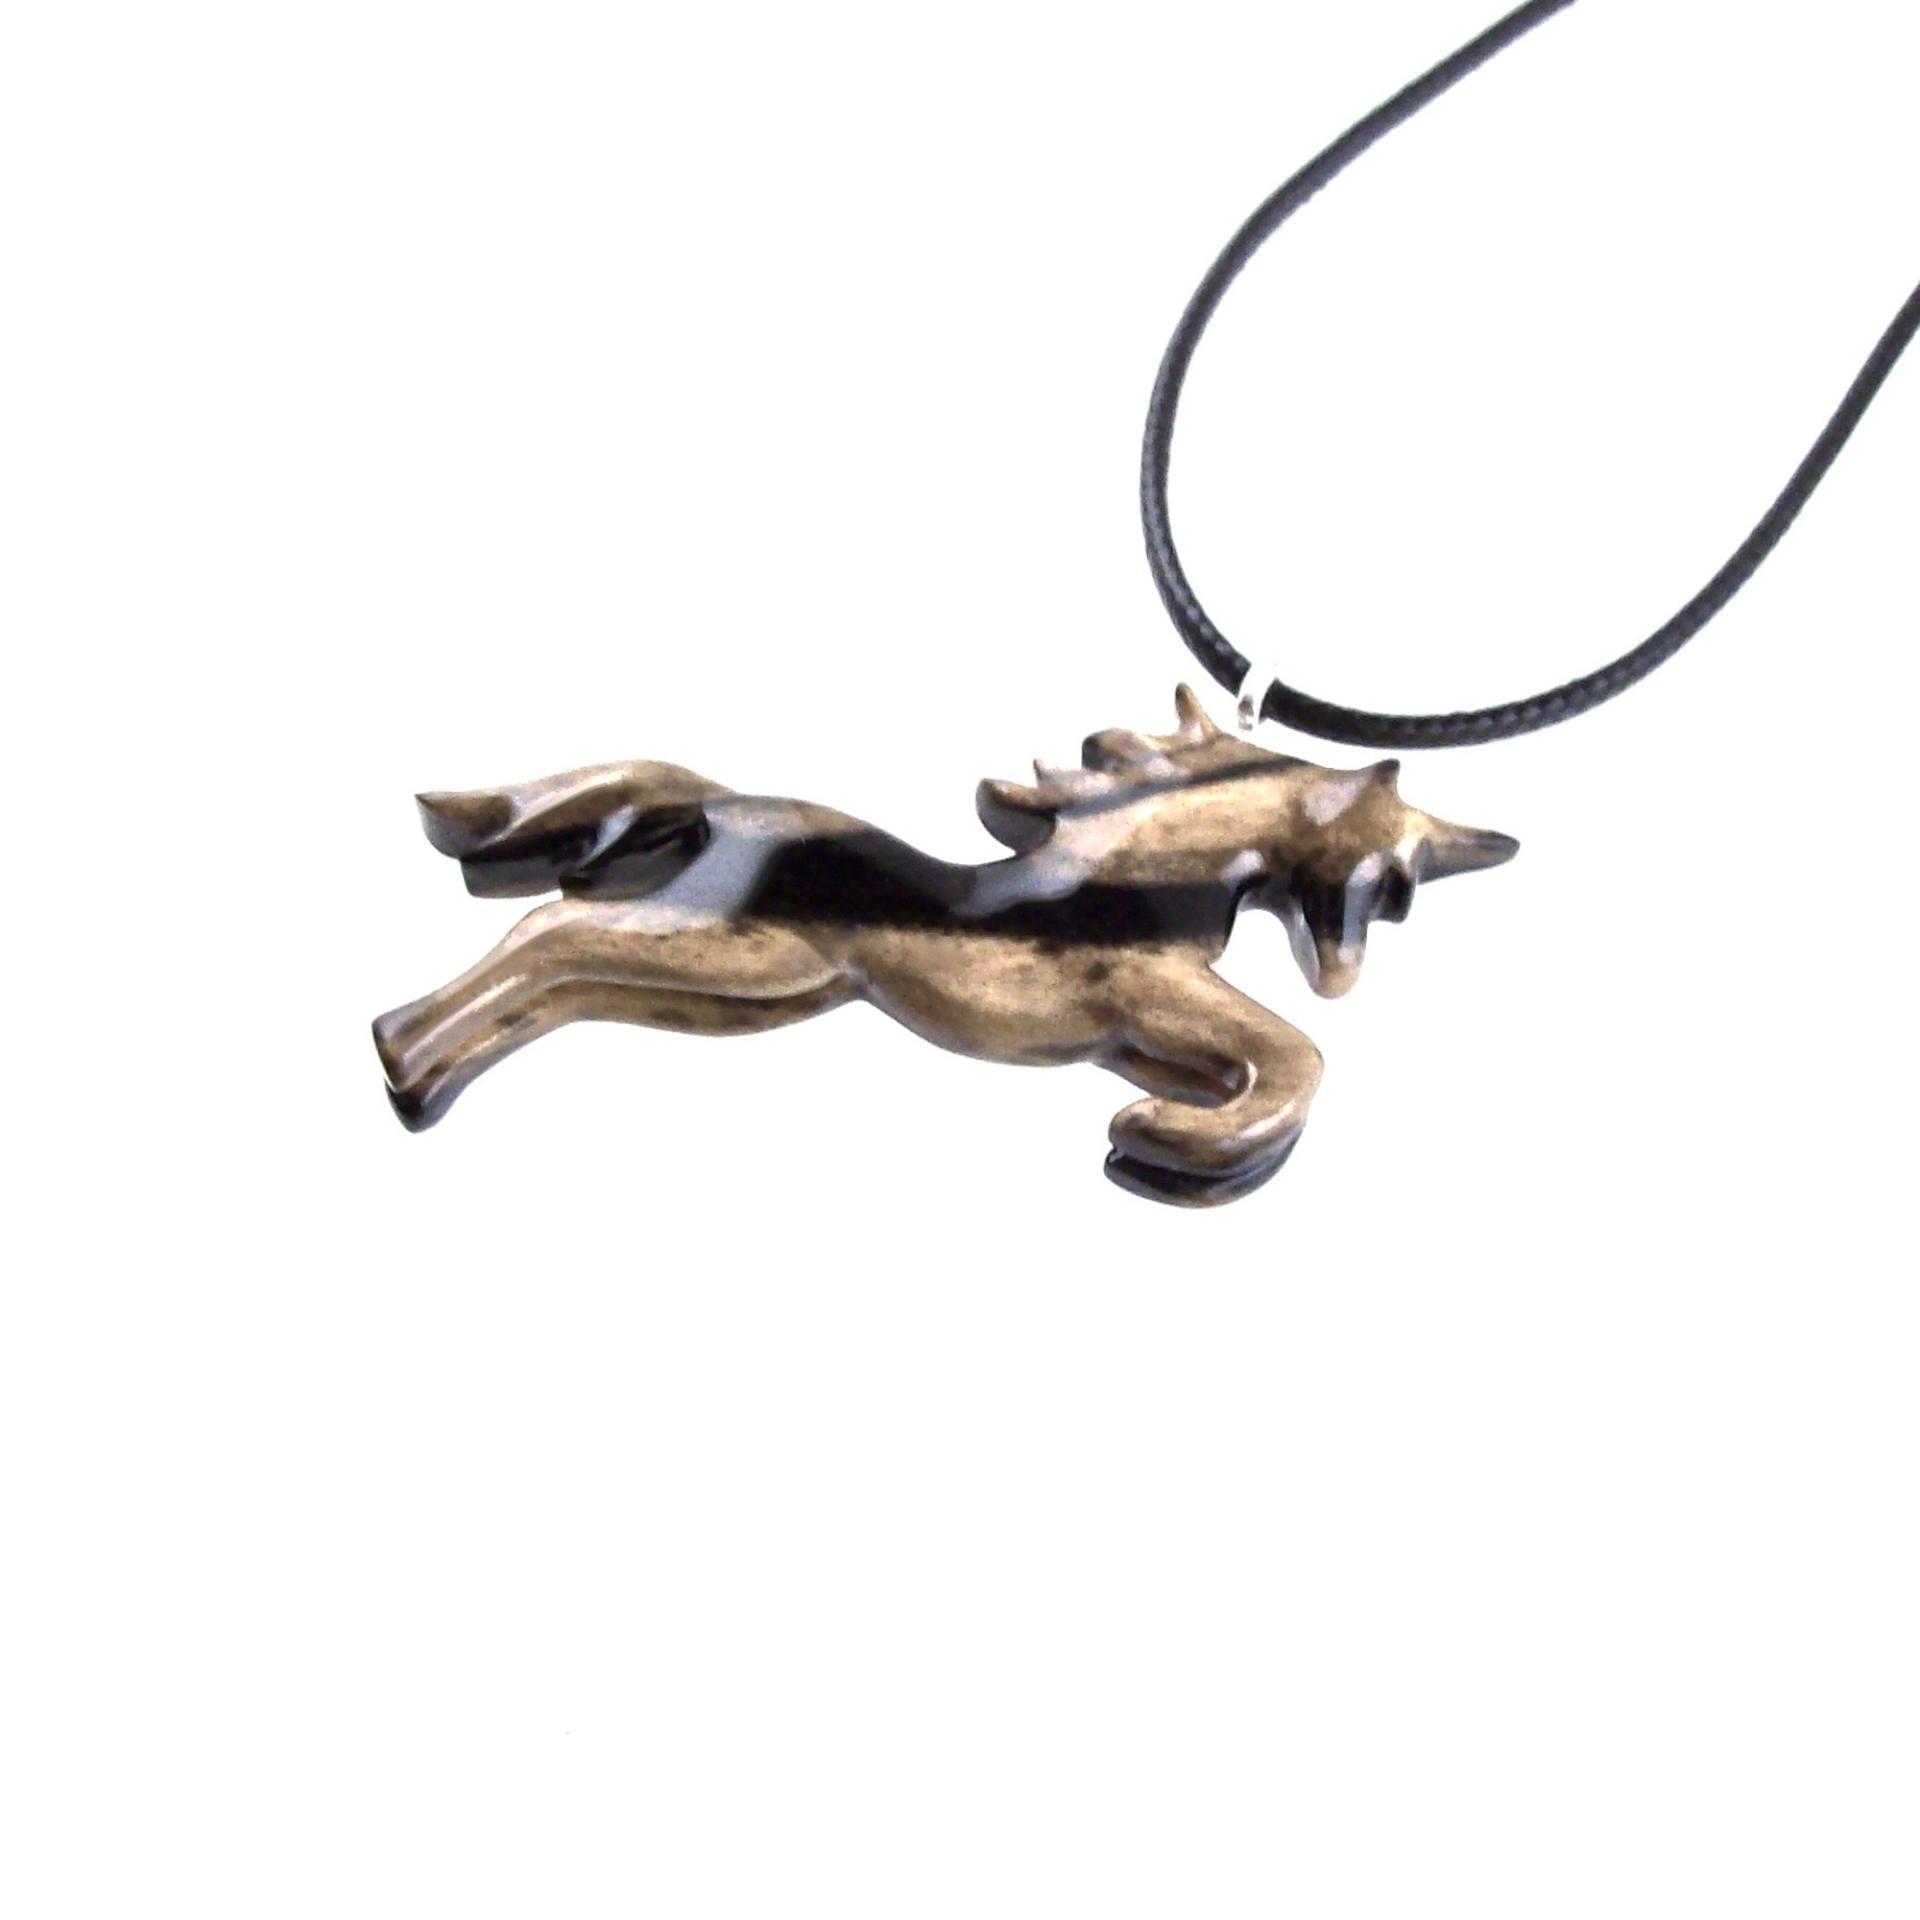 Unicorn Necklace, Hand Carved Wooden Unicorn Pendant, Fantasy Animal Wood Jewelry, One of a Kind Gift for Her